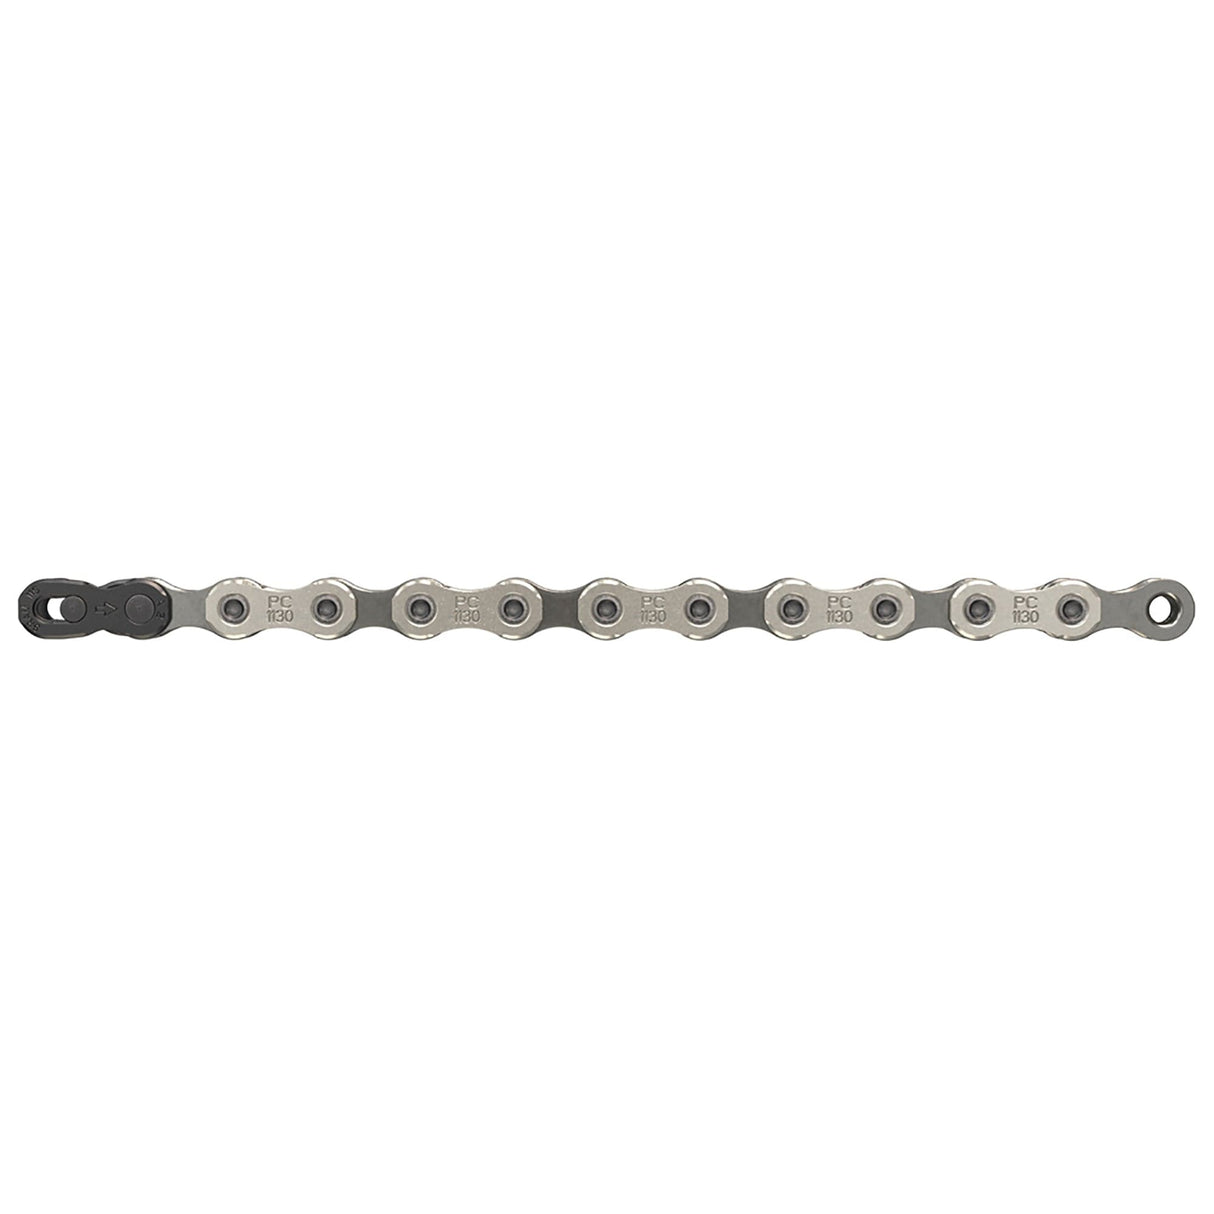 Sram Chain Qty 25 Pc1130 Solid Pin 120 Links Powerlock 11-Speed : Silver 11 Speed